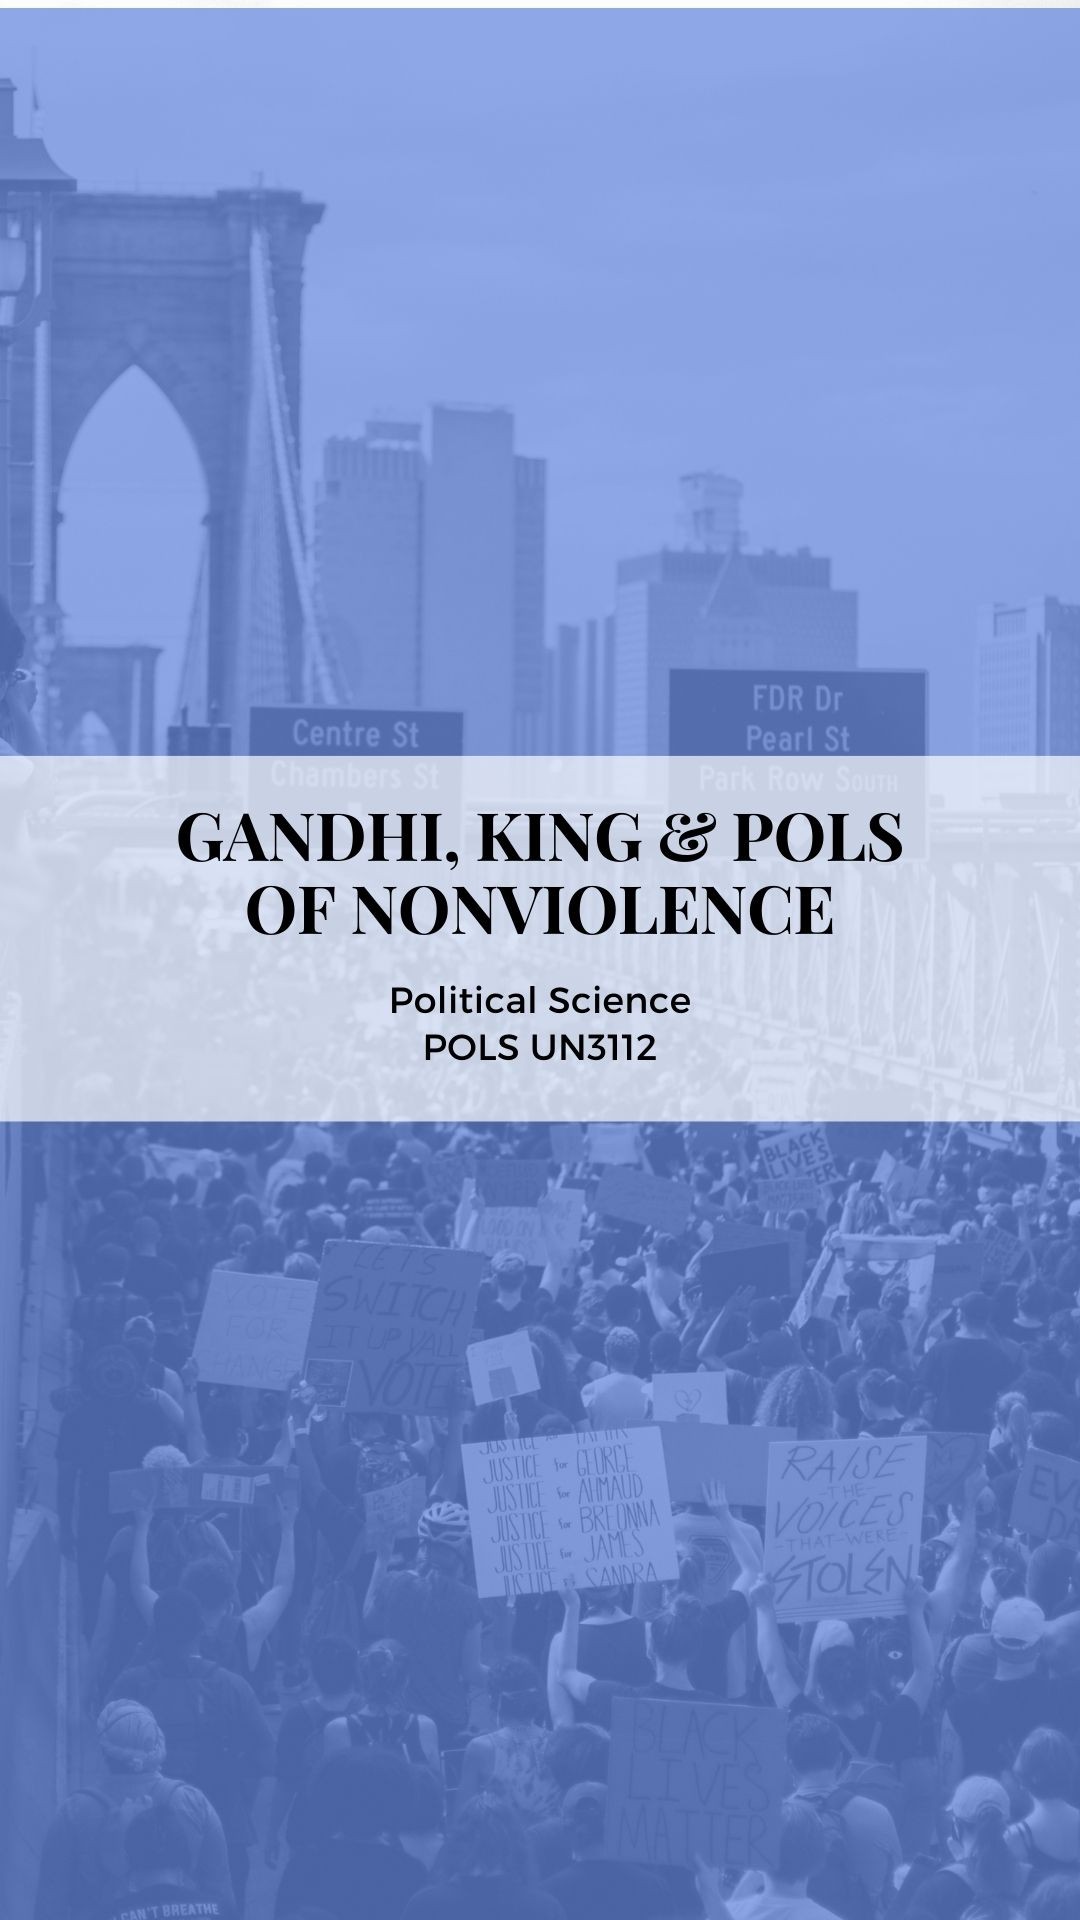 Spring 2021 course GANDHI, KING ＆ POLS OF NONVIOLENCE; course number POLS UN3112